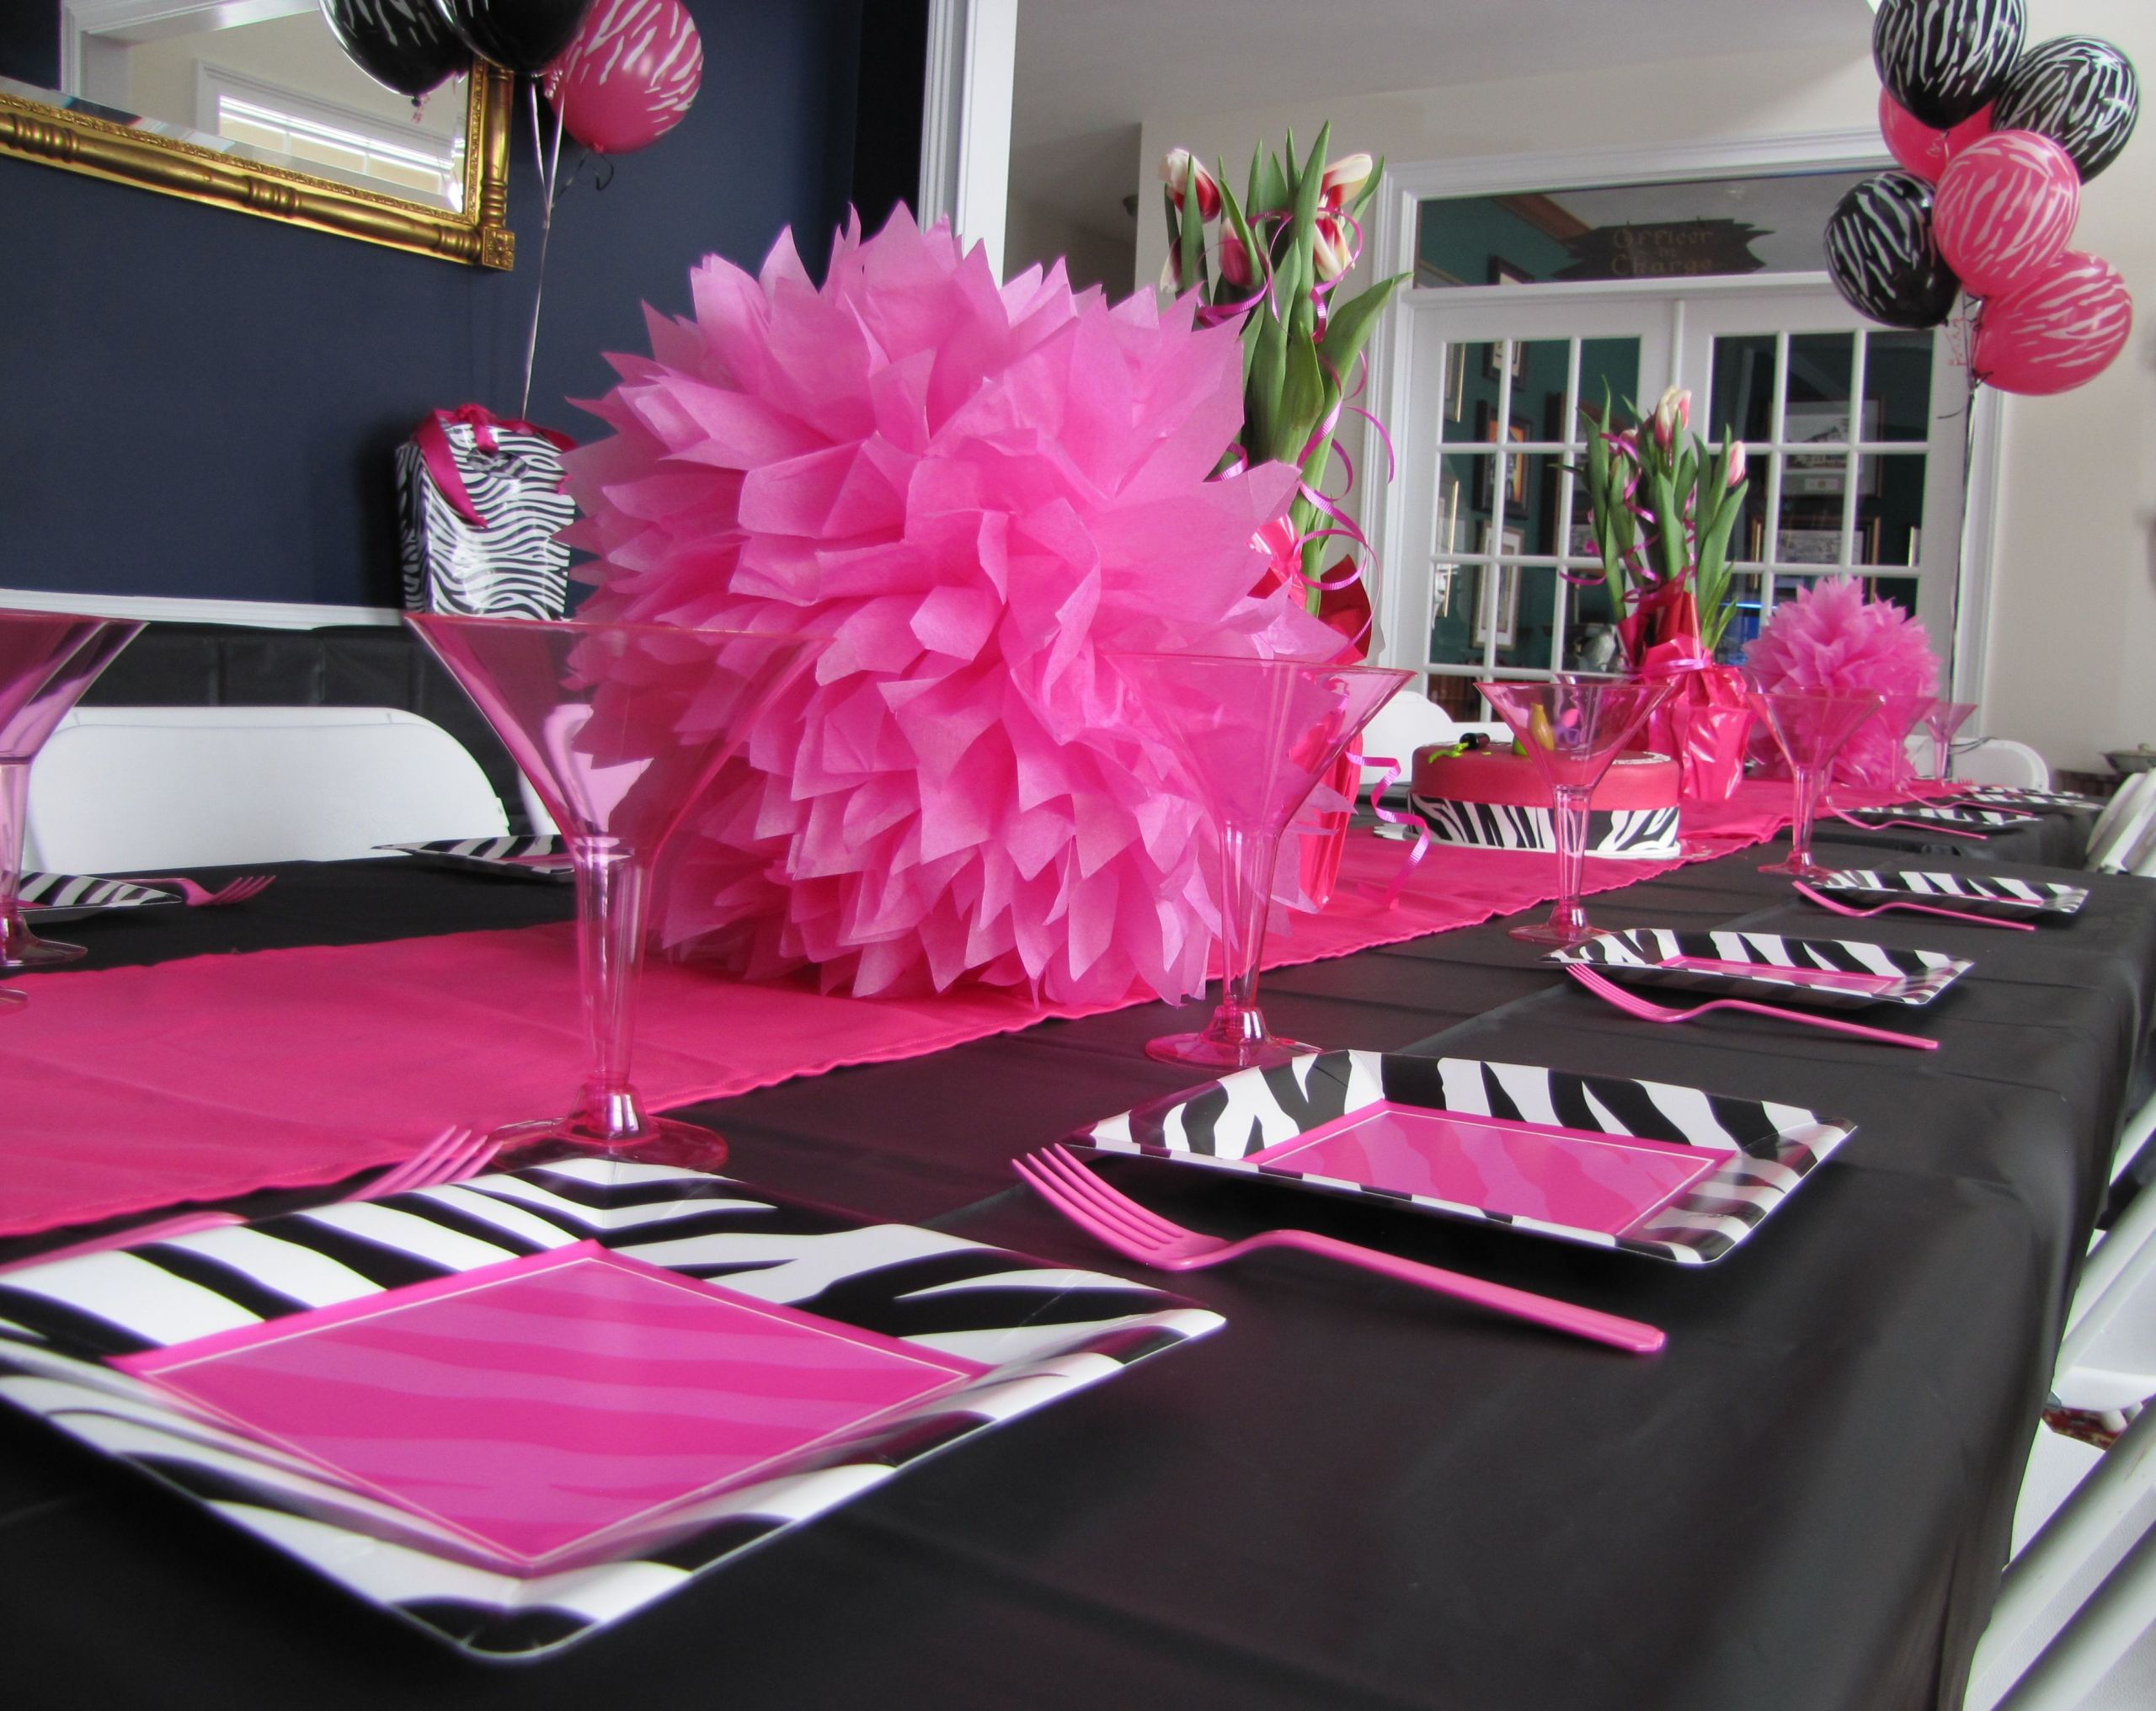 Zebra Print And Pink Birthday Party Ideas
 Zebra Print Party Supplies and Decorations